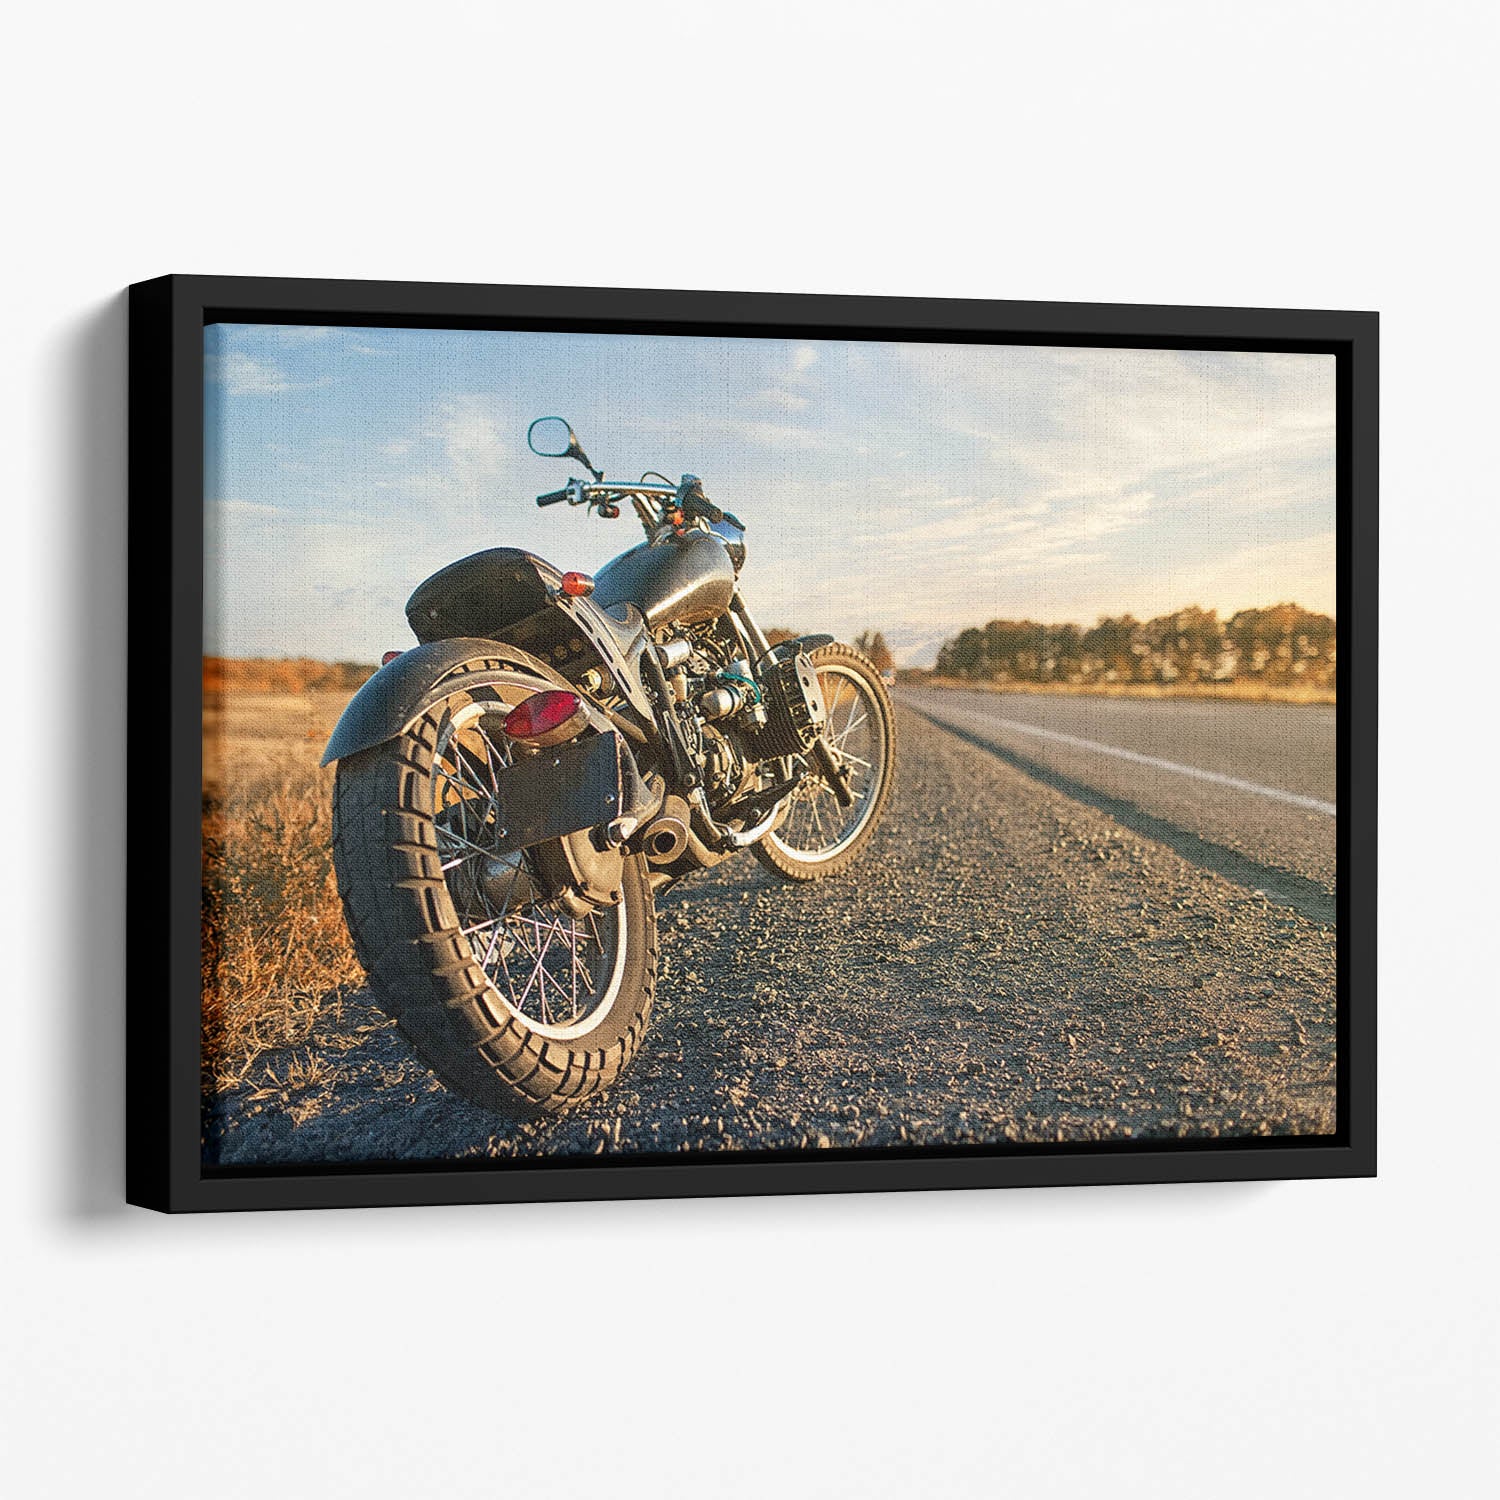 Motorbike under the clear sky Floating Framed Canvas